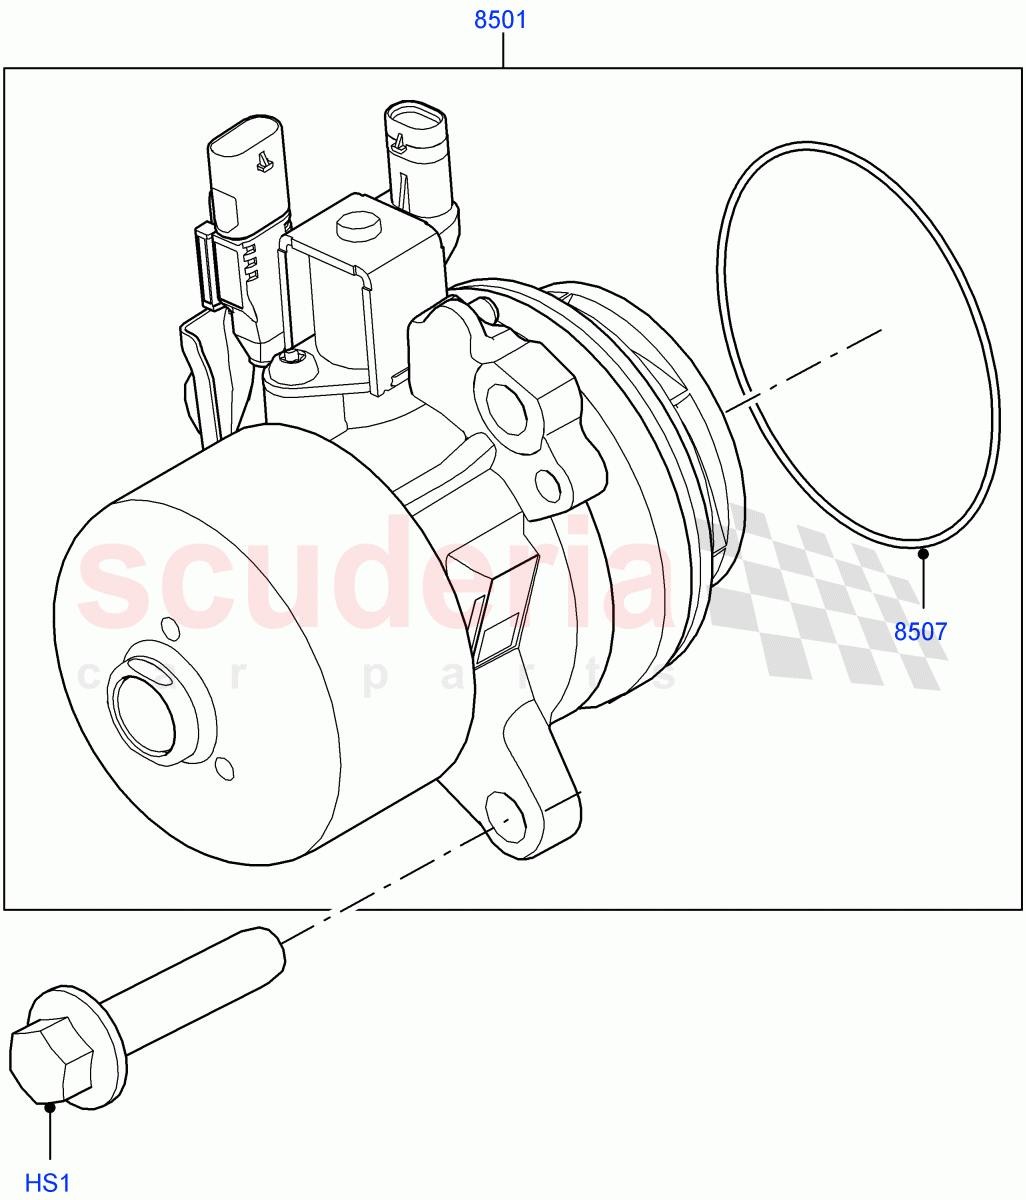 Water Pump(Main Unit)(3.0L AJ20D6 Diesel High)((V)FROMM2000001) of Land Rover Land Rover Discovery 5 (2017+) [3.0 I6 Turbo Diesel AJ20D6]